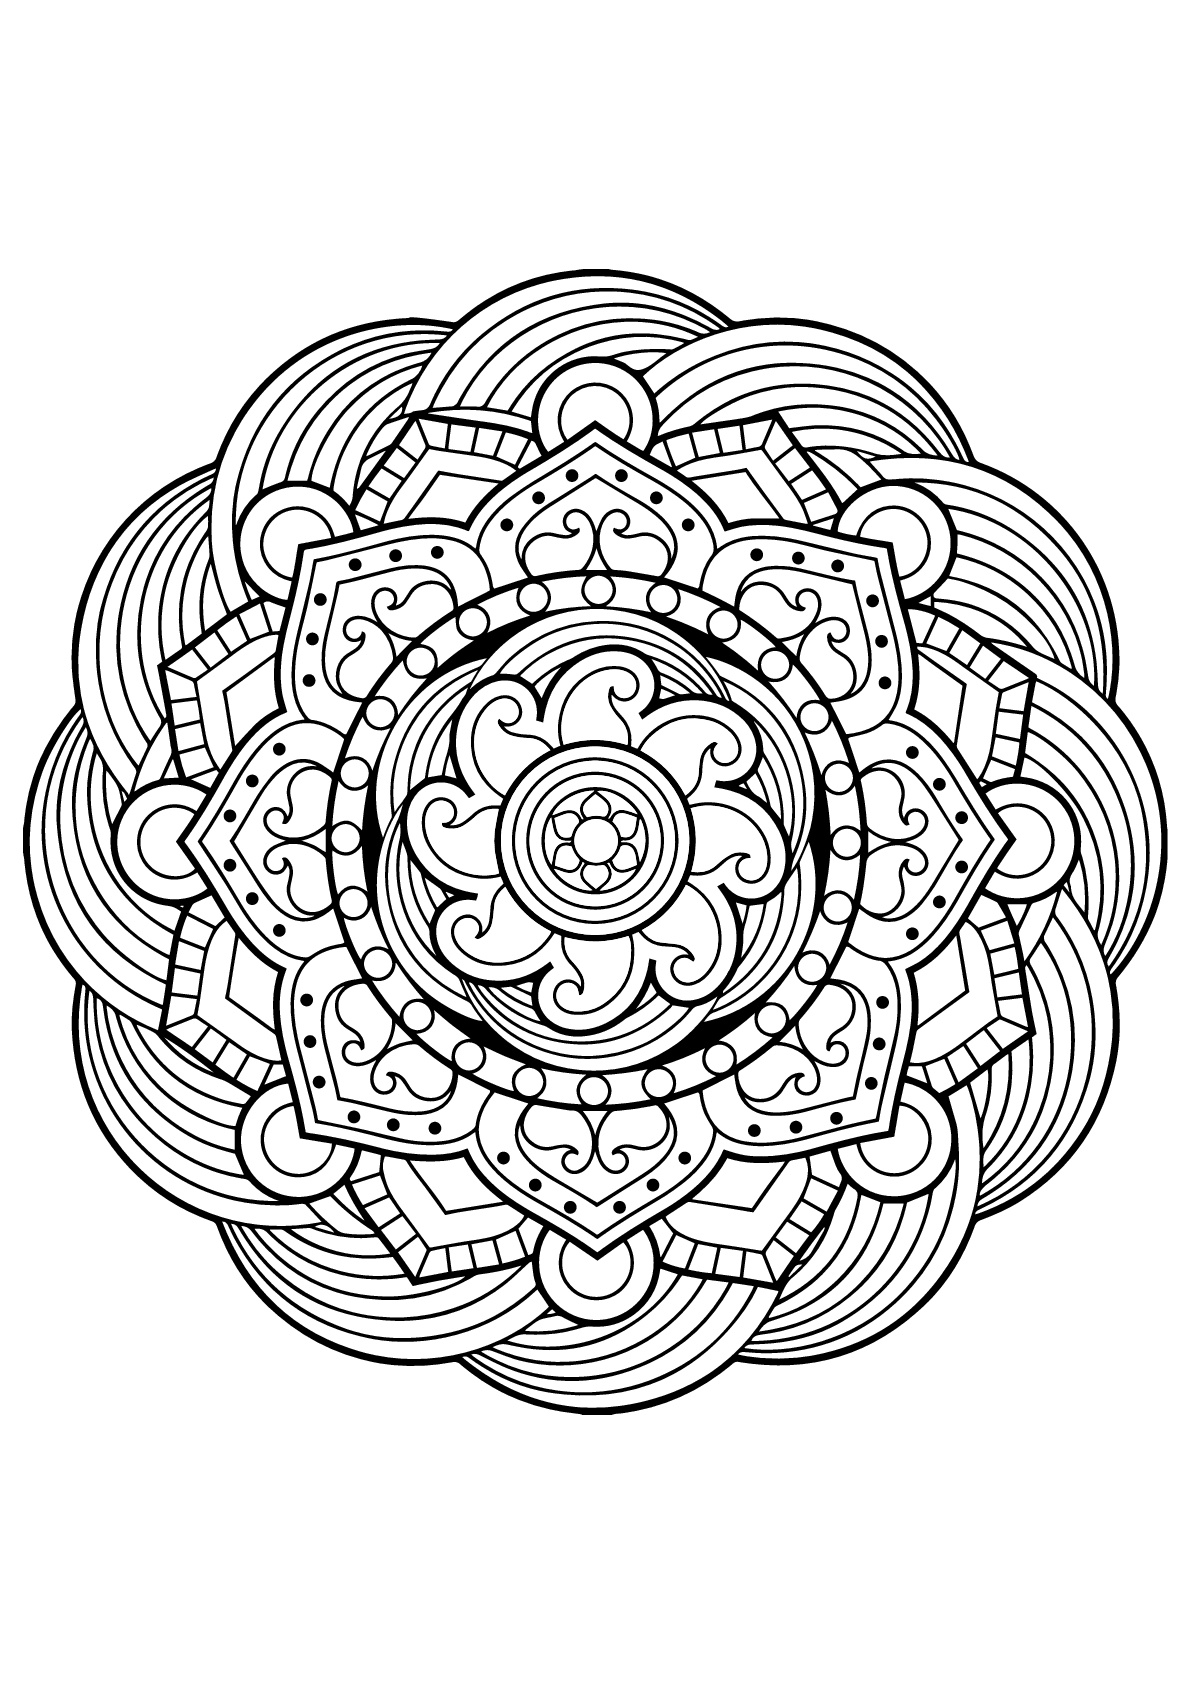 Hypnotizing Mandala from Free Coloring book for adults